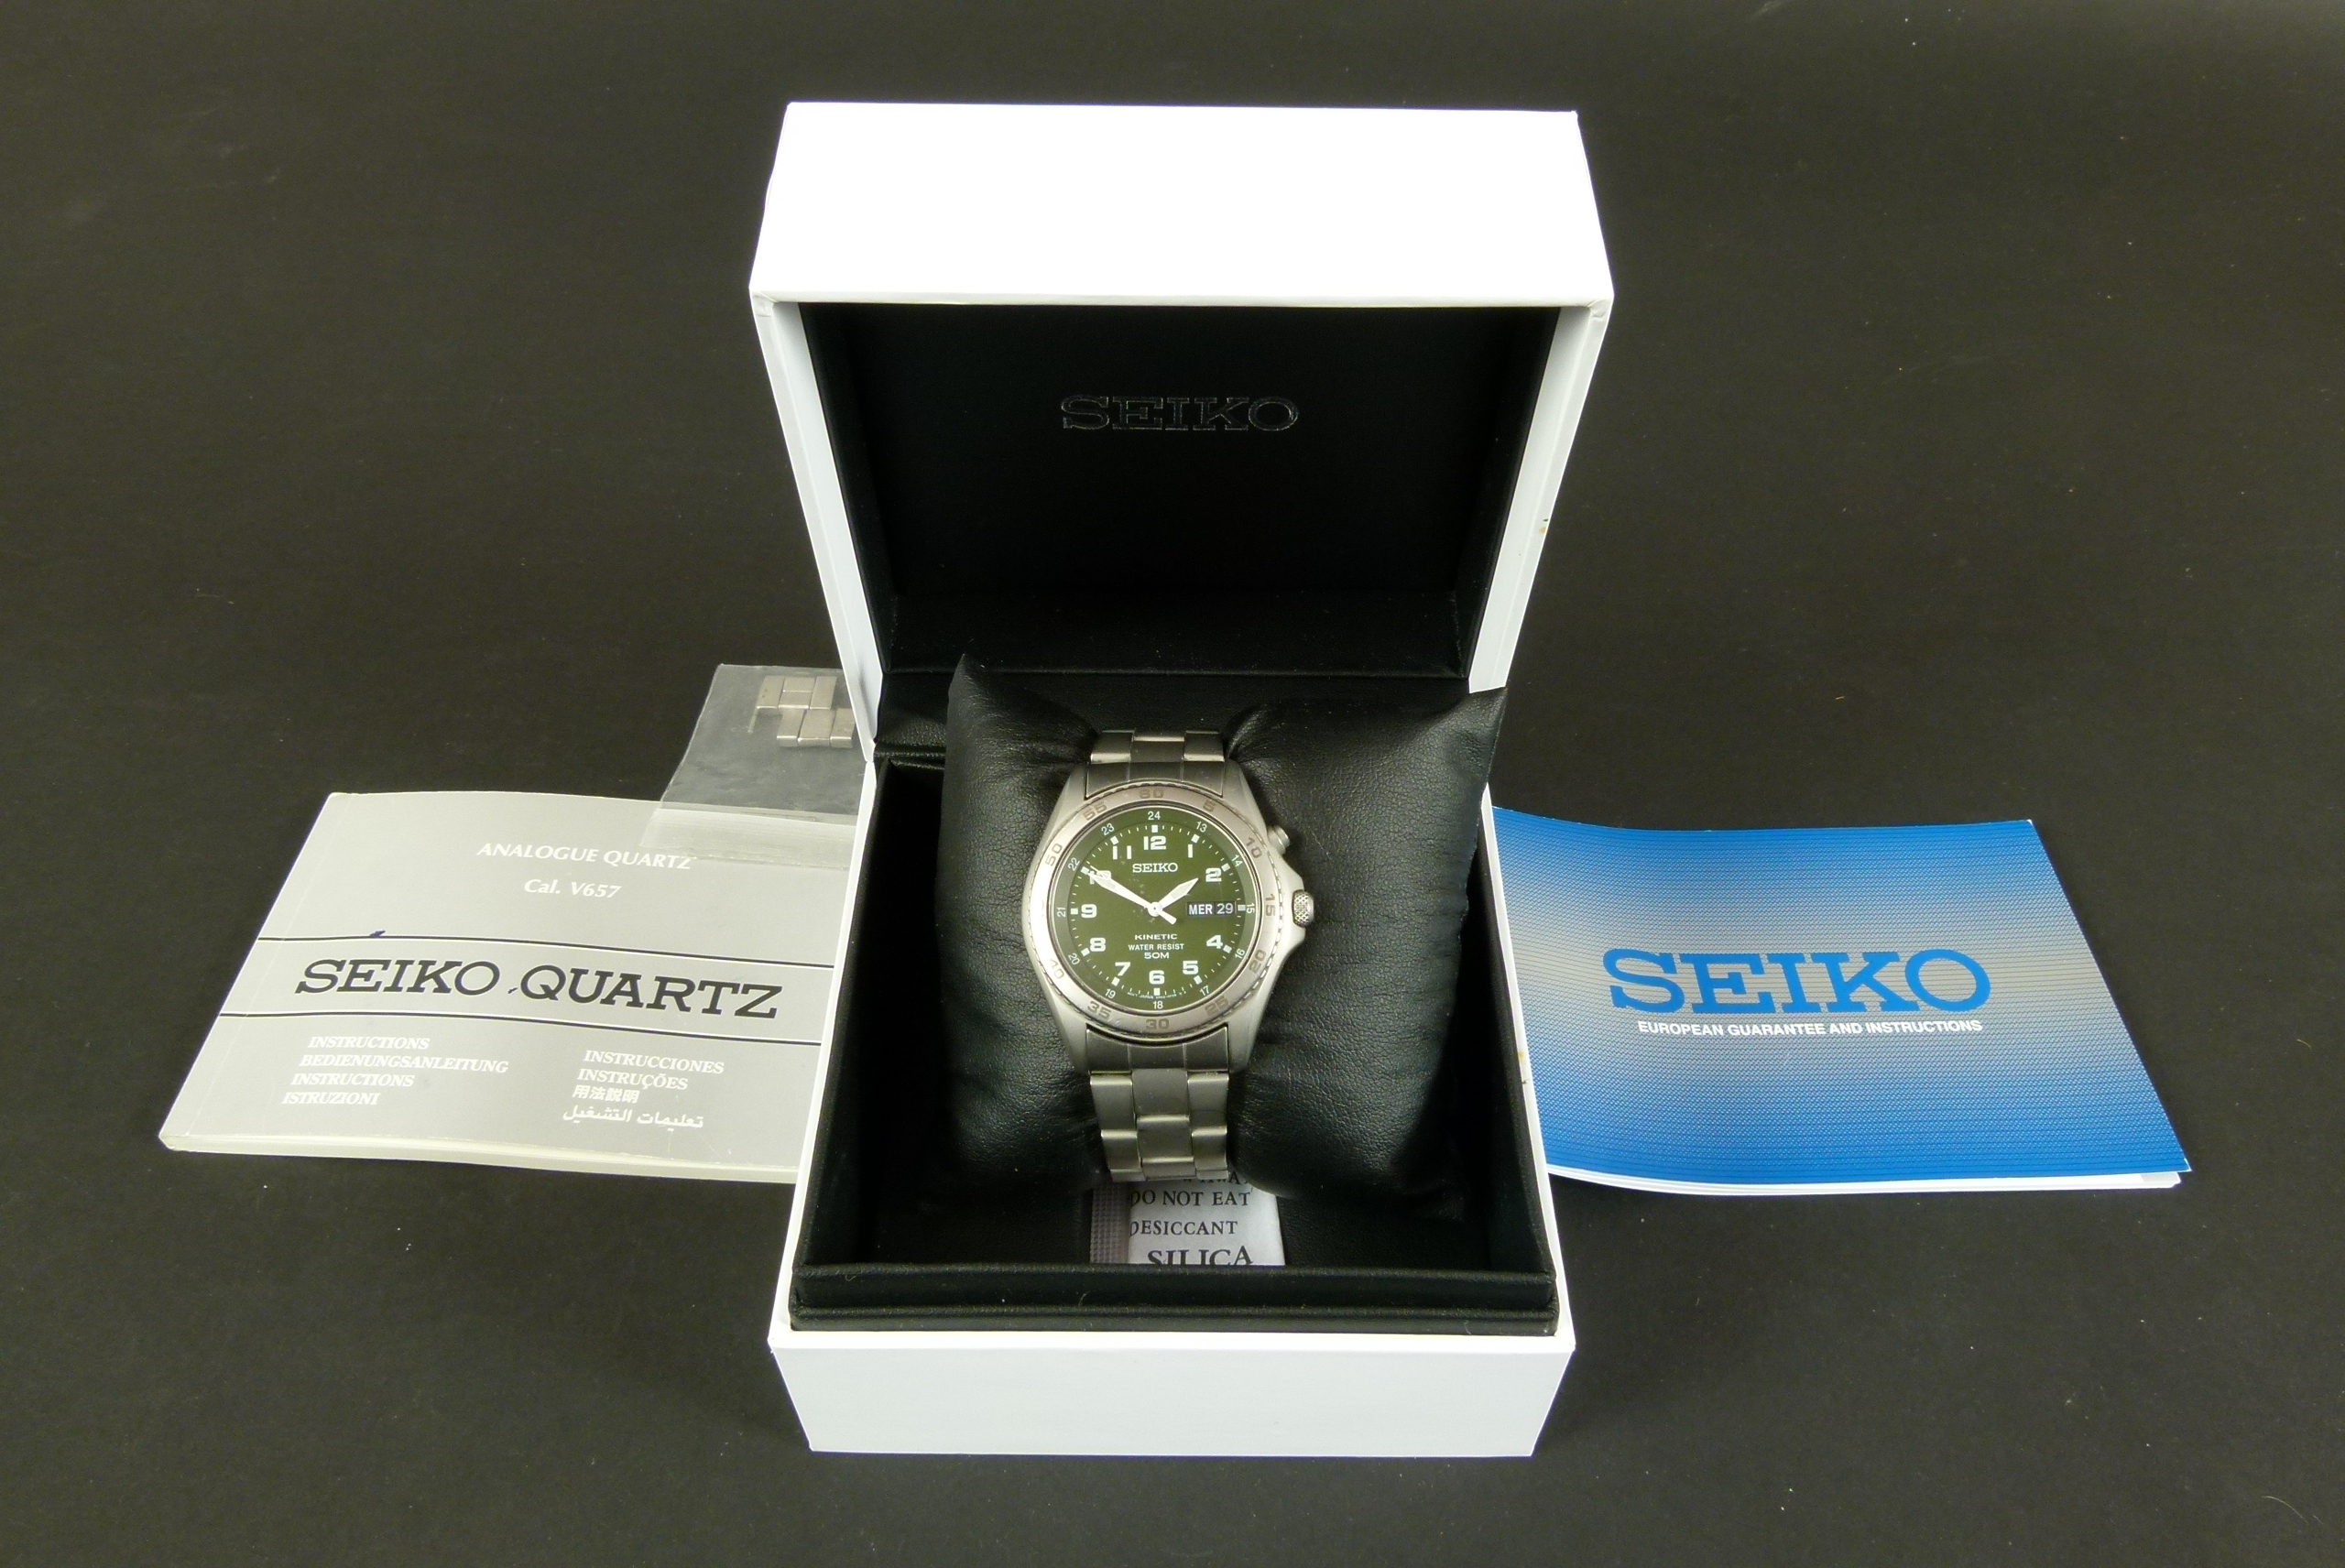 Seiko gentleman's kinetic day and date wristwatch in stainless steel case No 810153, green dial with